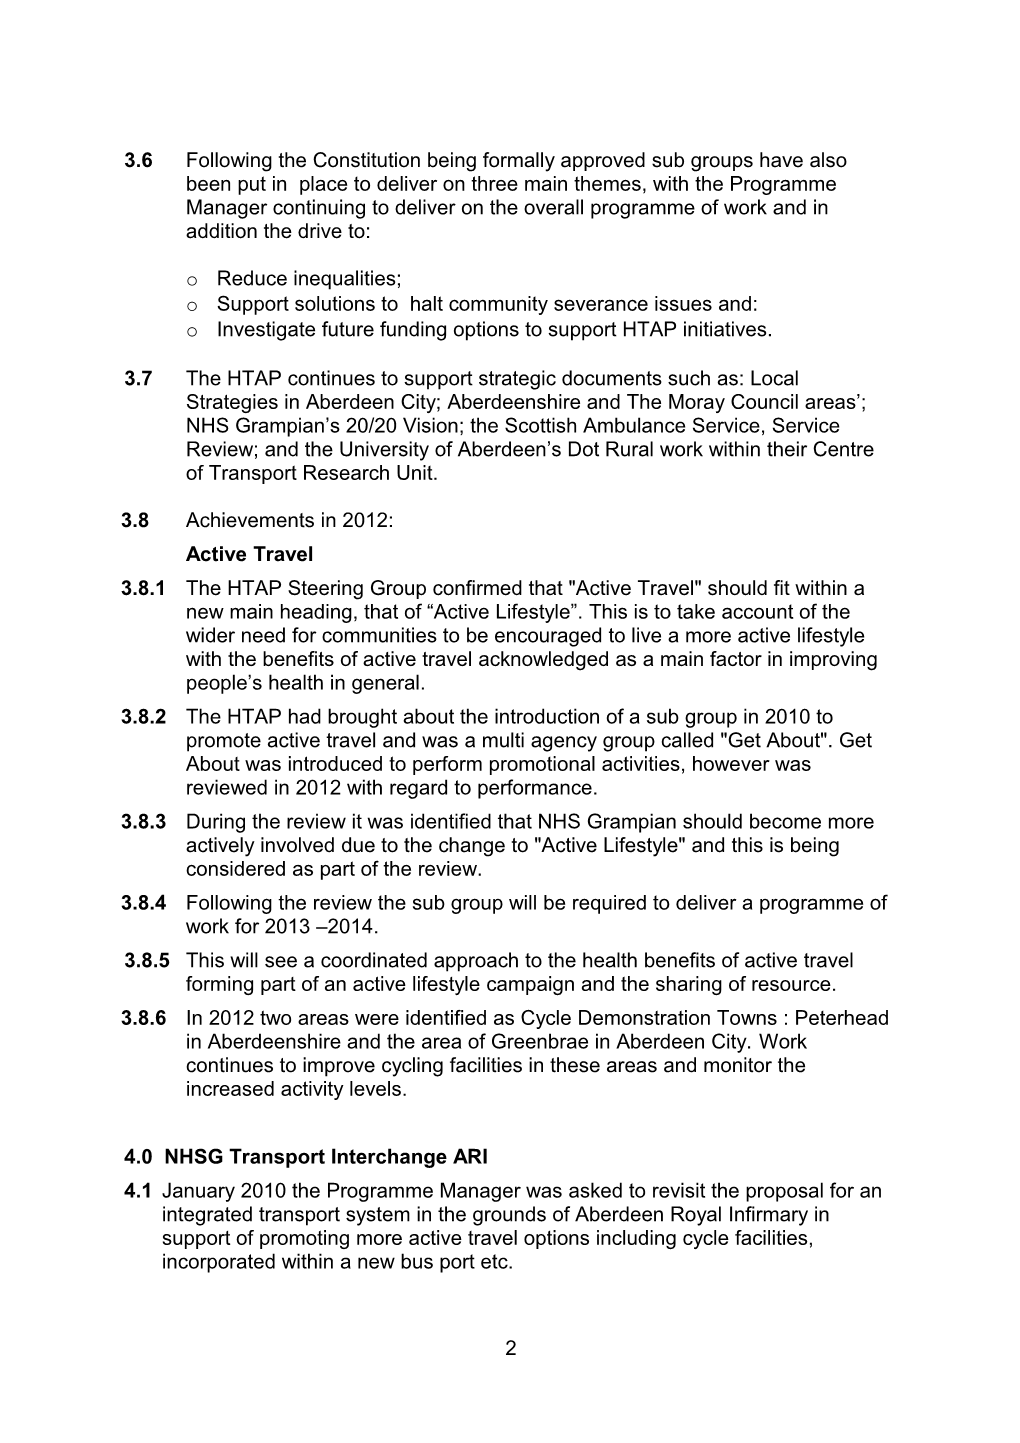 Item 9 for 2 Oct 2012 Health and Transport Action Plan